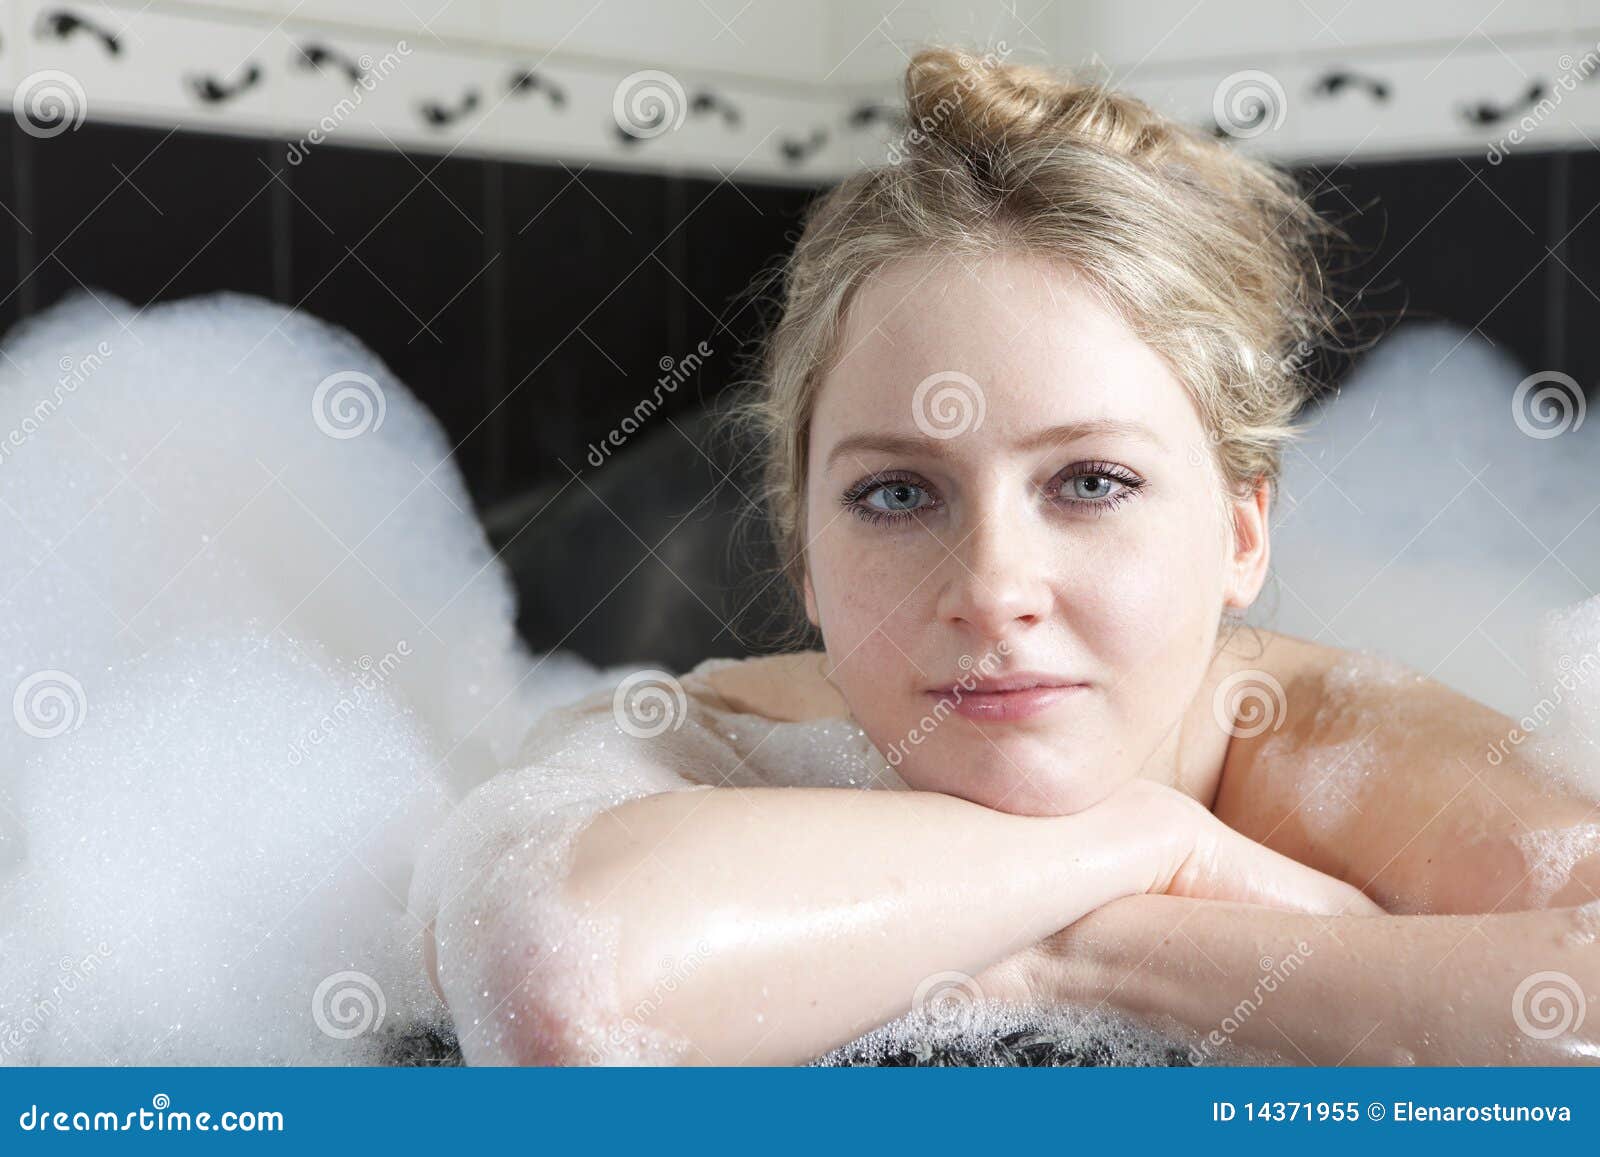 Young Woman Enjoys The Bath Foam In The Bathtub Stock Image Image Of